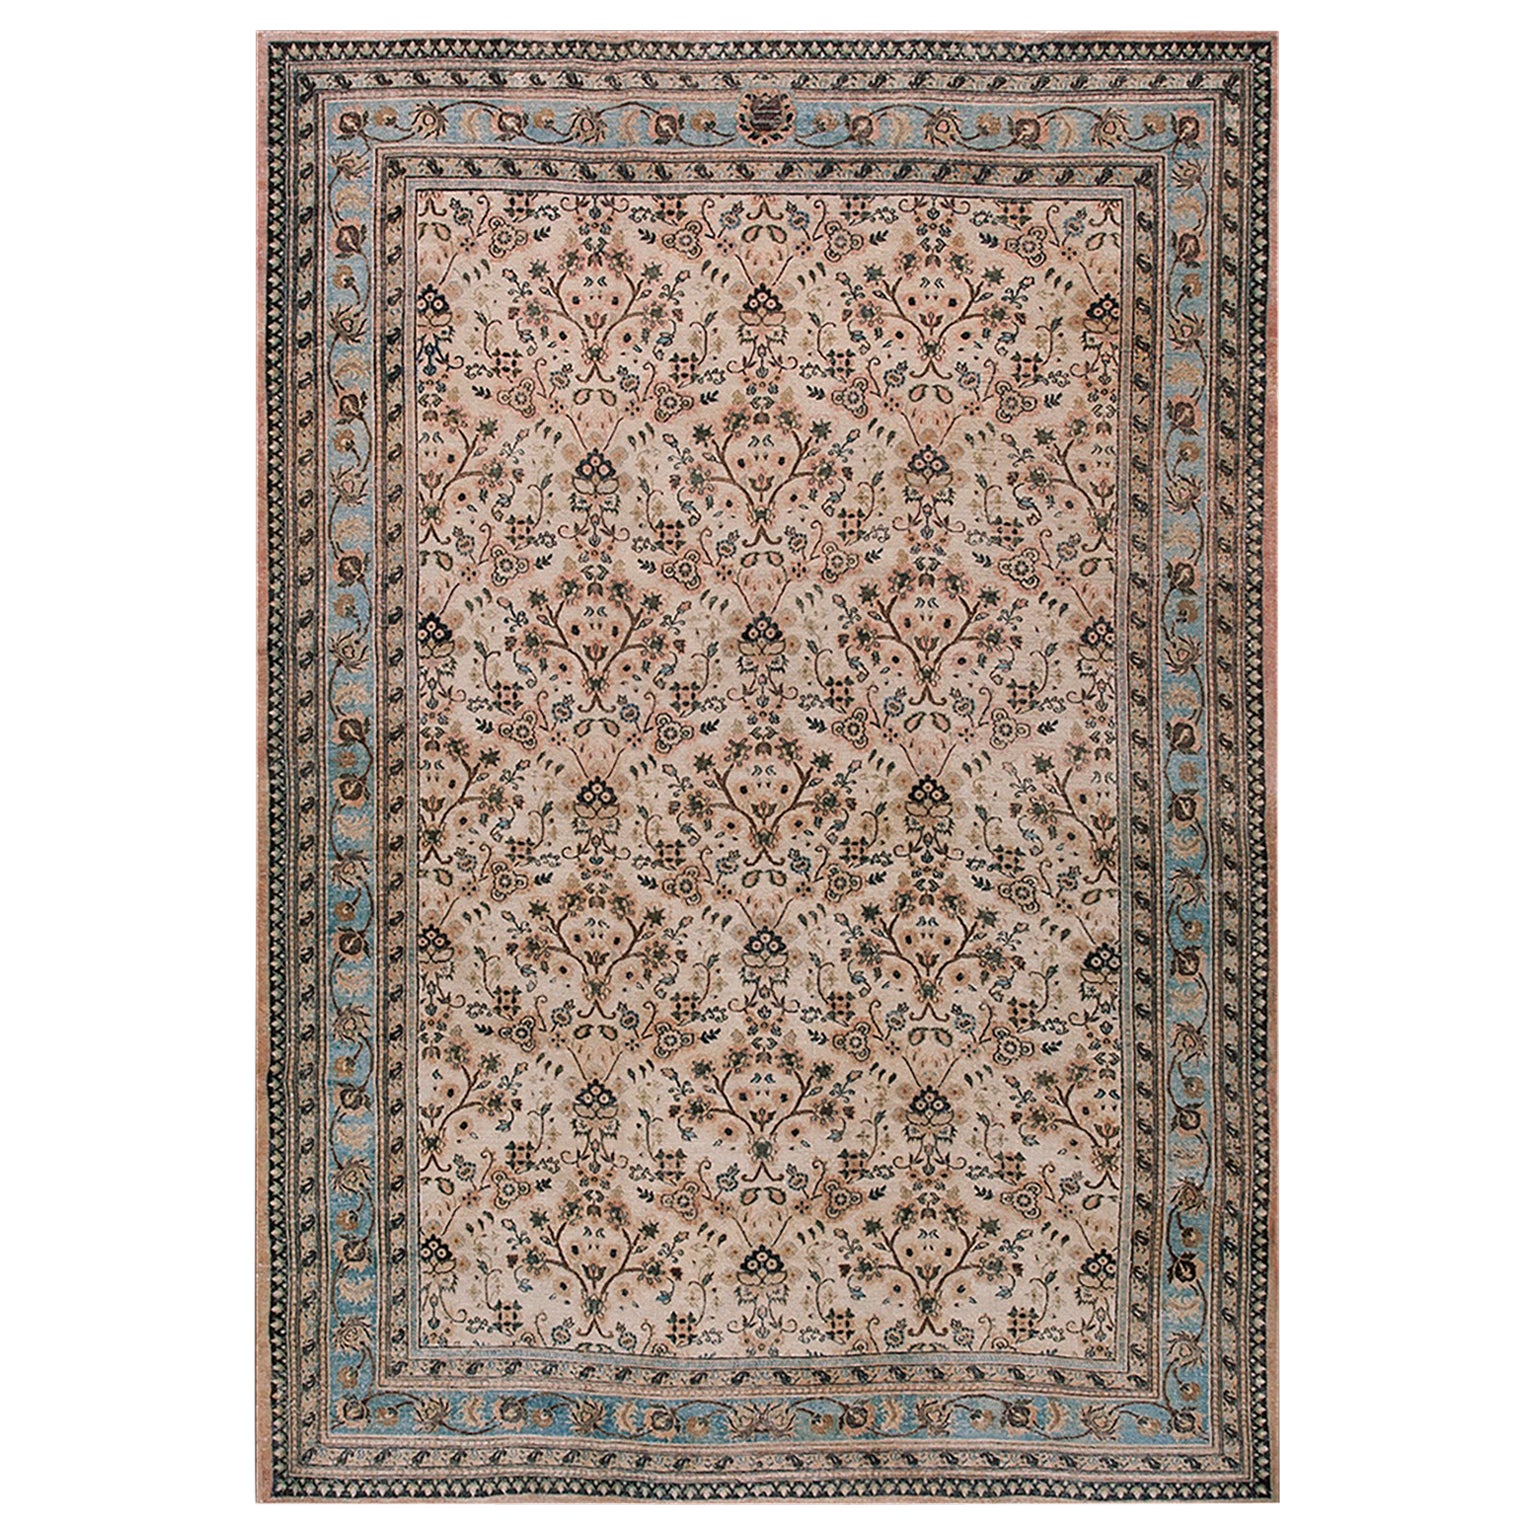 Early 20th Century N.E. Persian Khorassan Moud Carpet (8' 6" x 10' - 260 x 305) For Sale